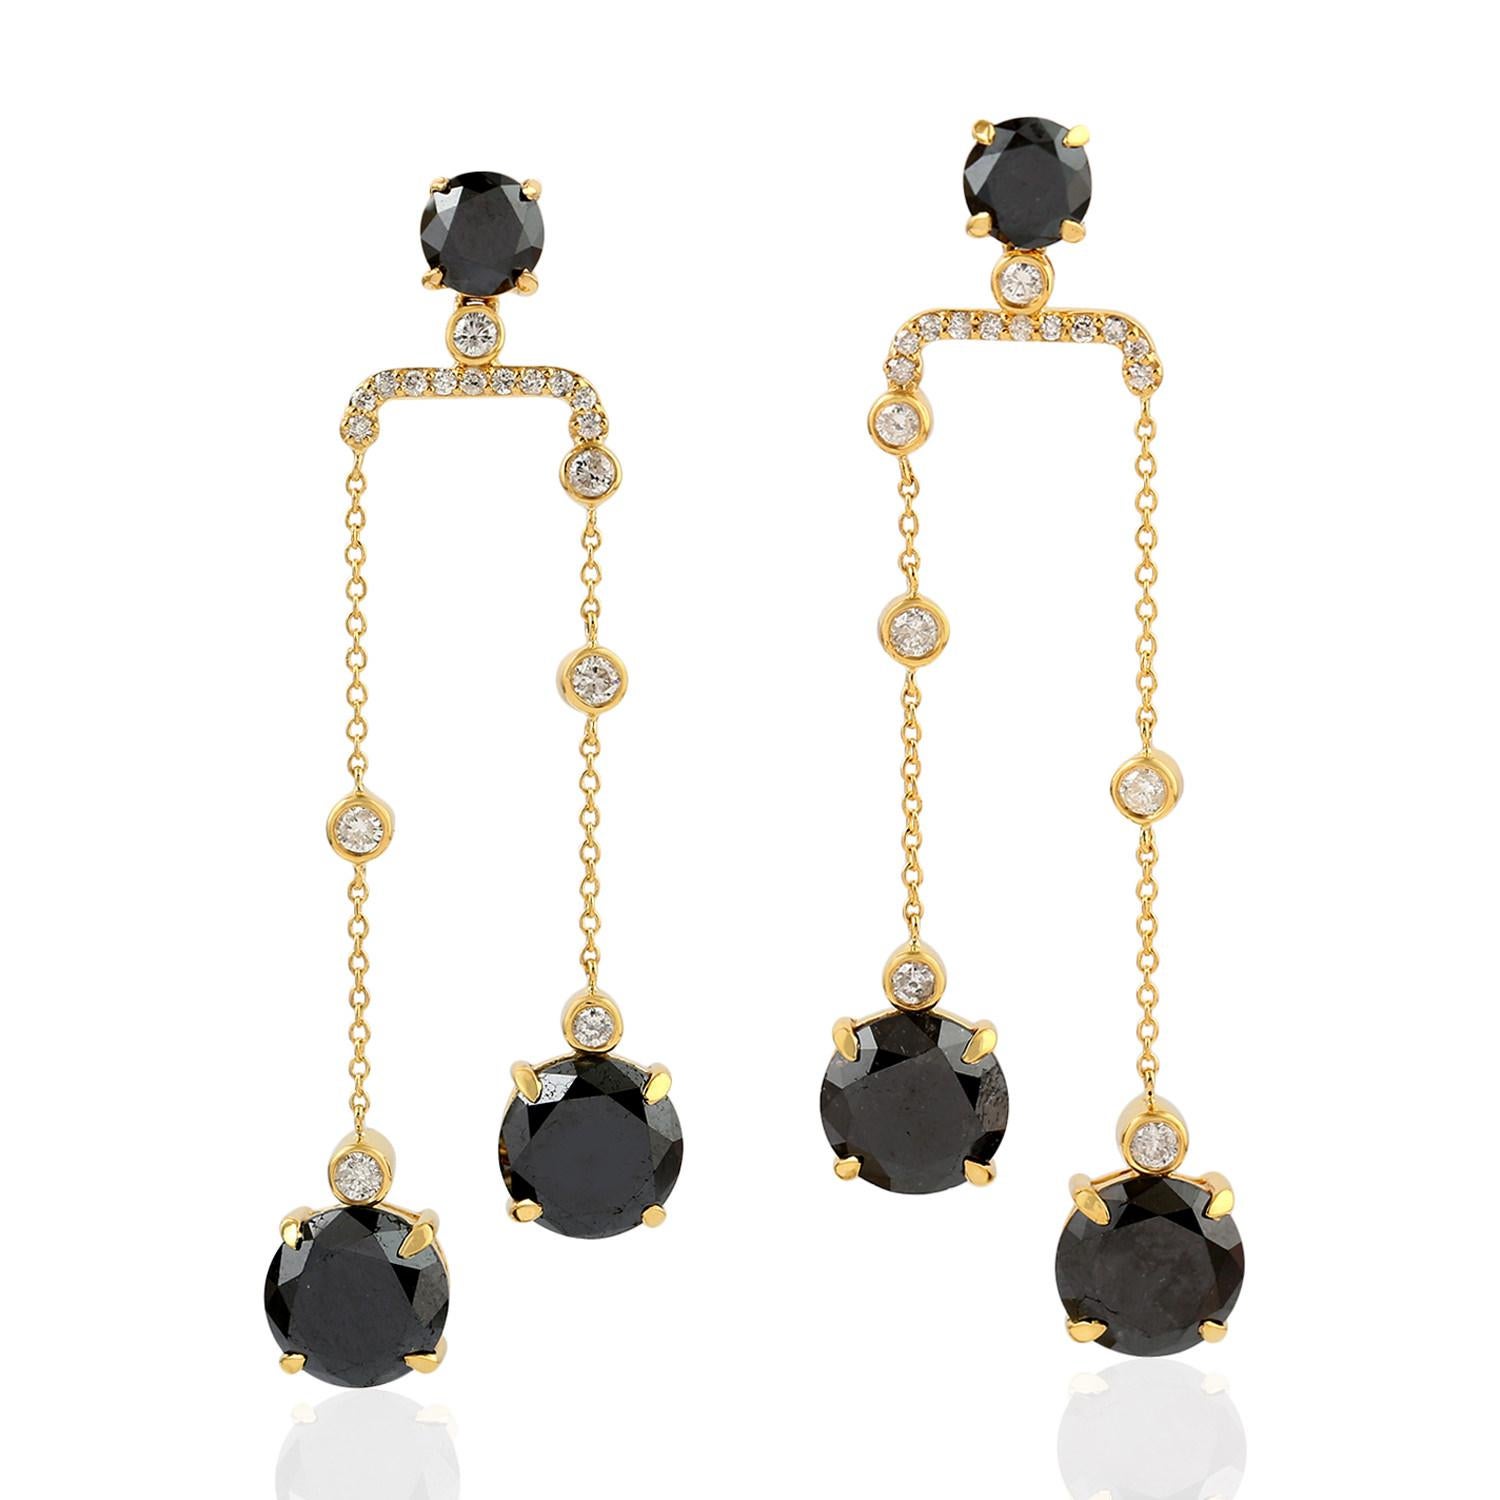 Round Cut Black Diamond Dangle Earrings Made in 18k Yellow Gold For Sale